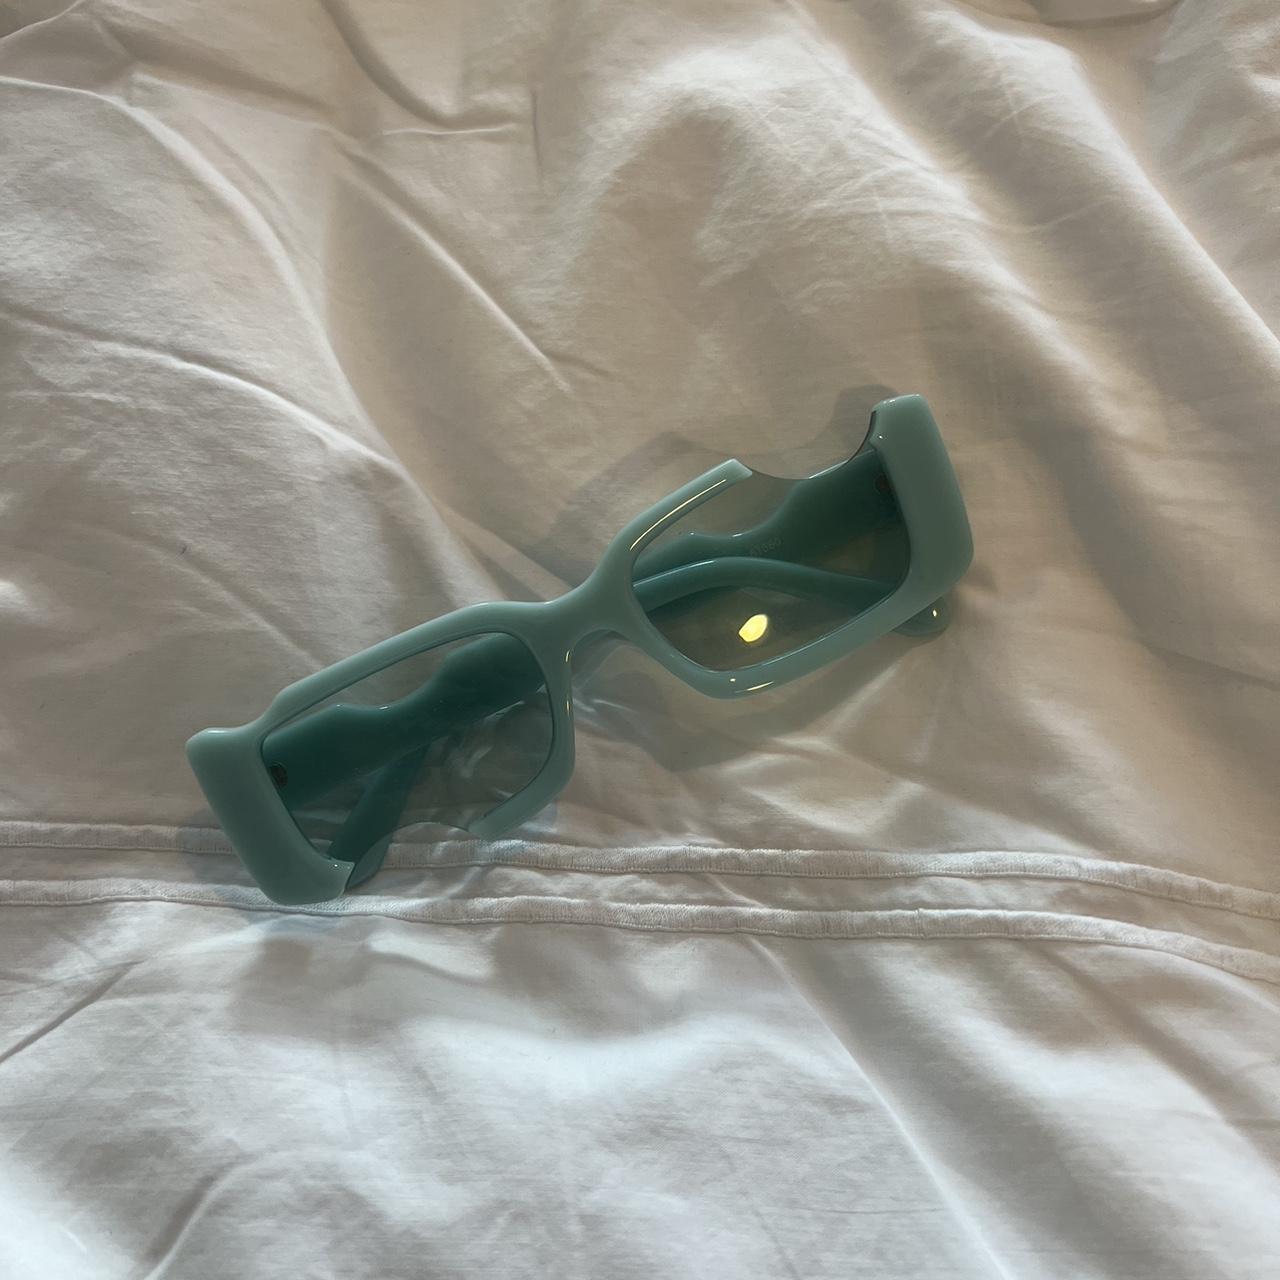 Black cut out sunglasses. Look like Off-White - Depop